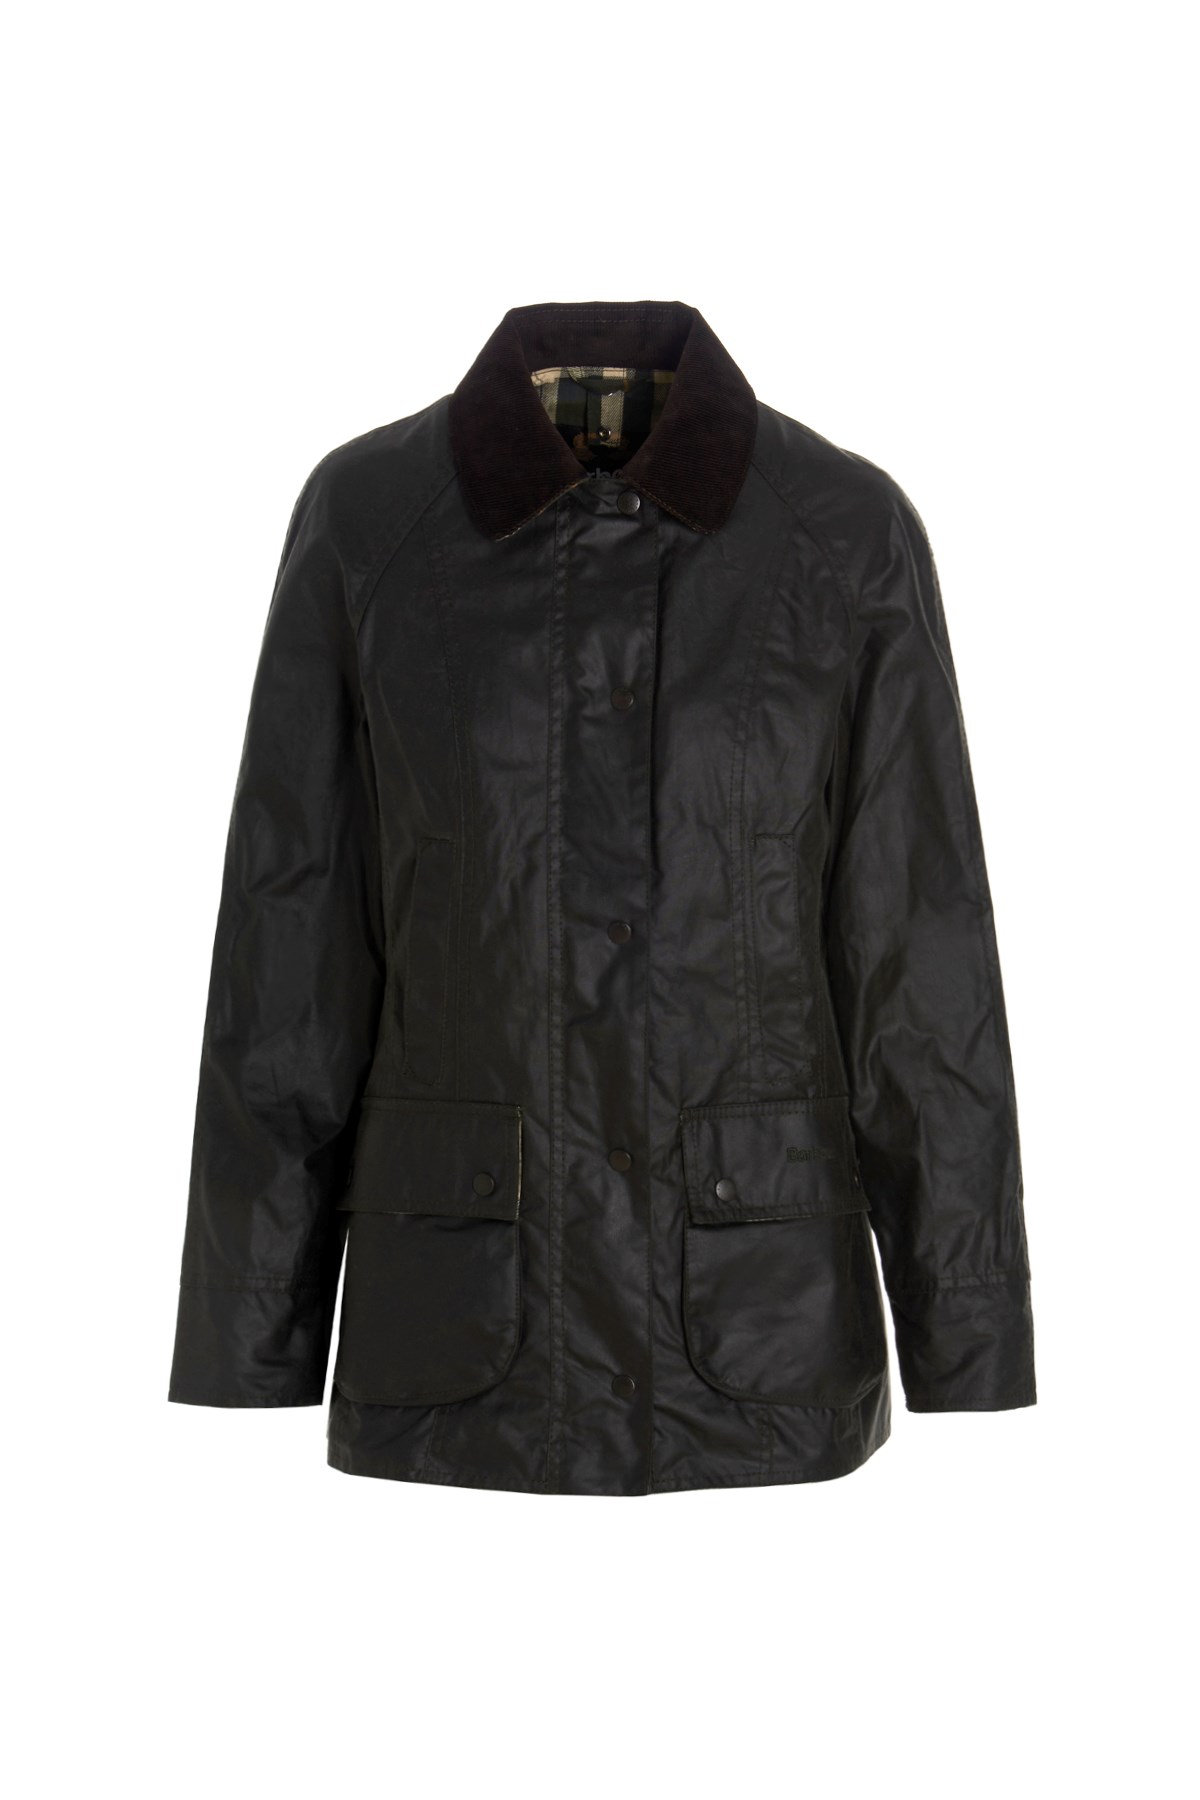 BARBOUR 'Beadnell' Jacke